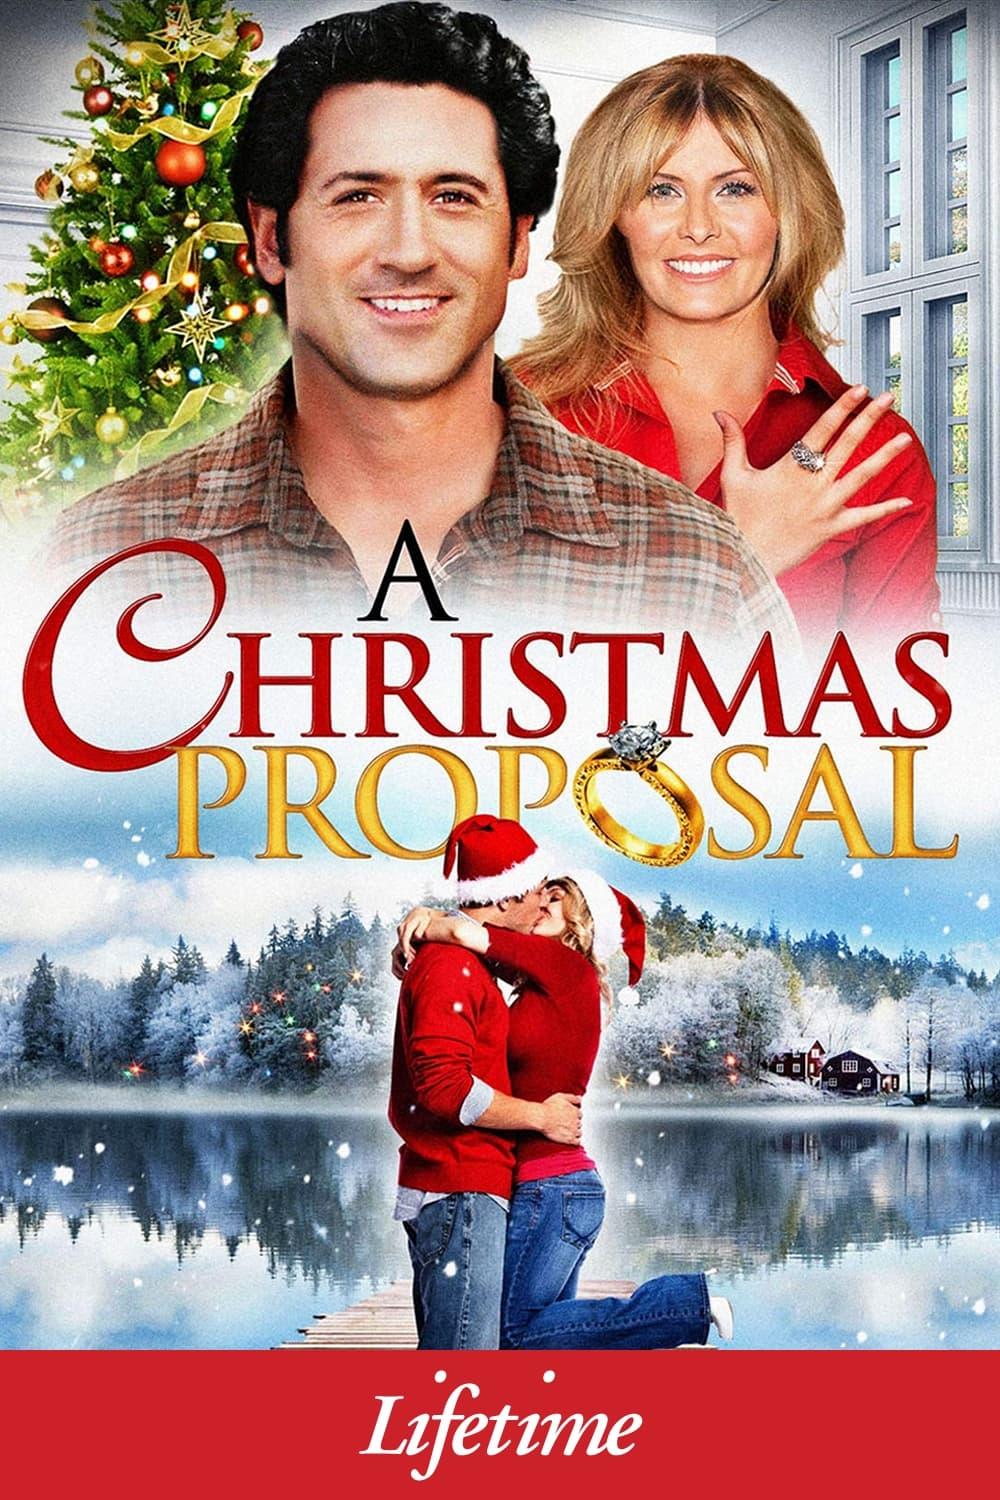 A Christmas Proposal poster